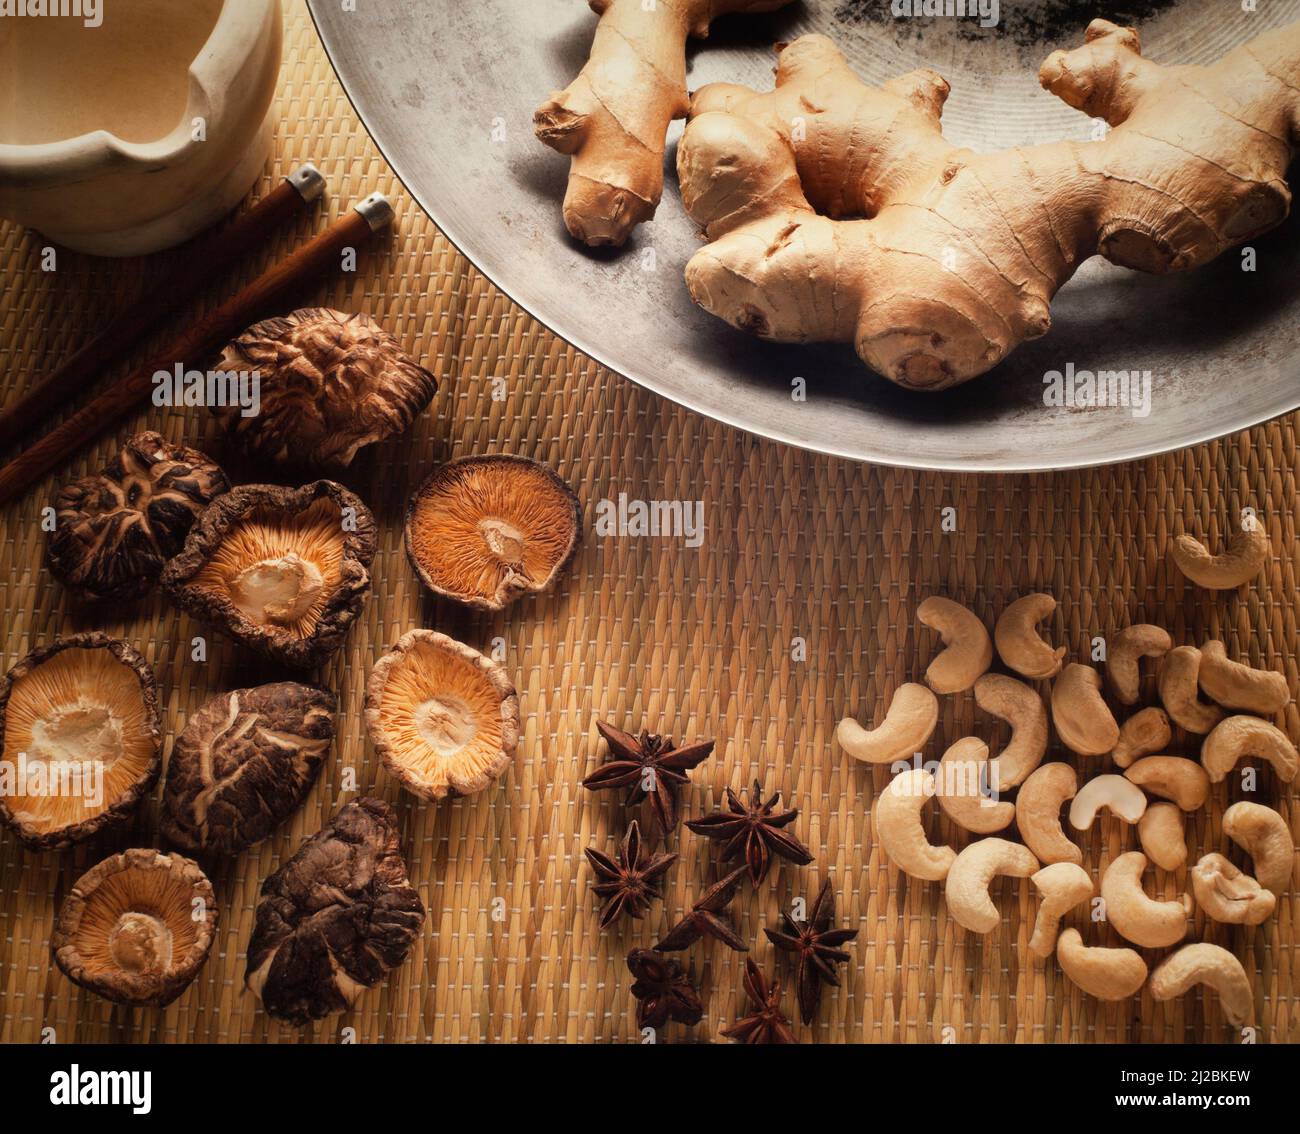 Asian Chinese food ingrediants, ginger,star anise, Chinese dried mushrooms, cashew nuts Stock Photo